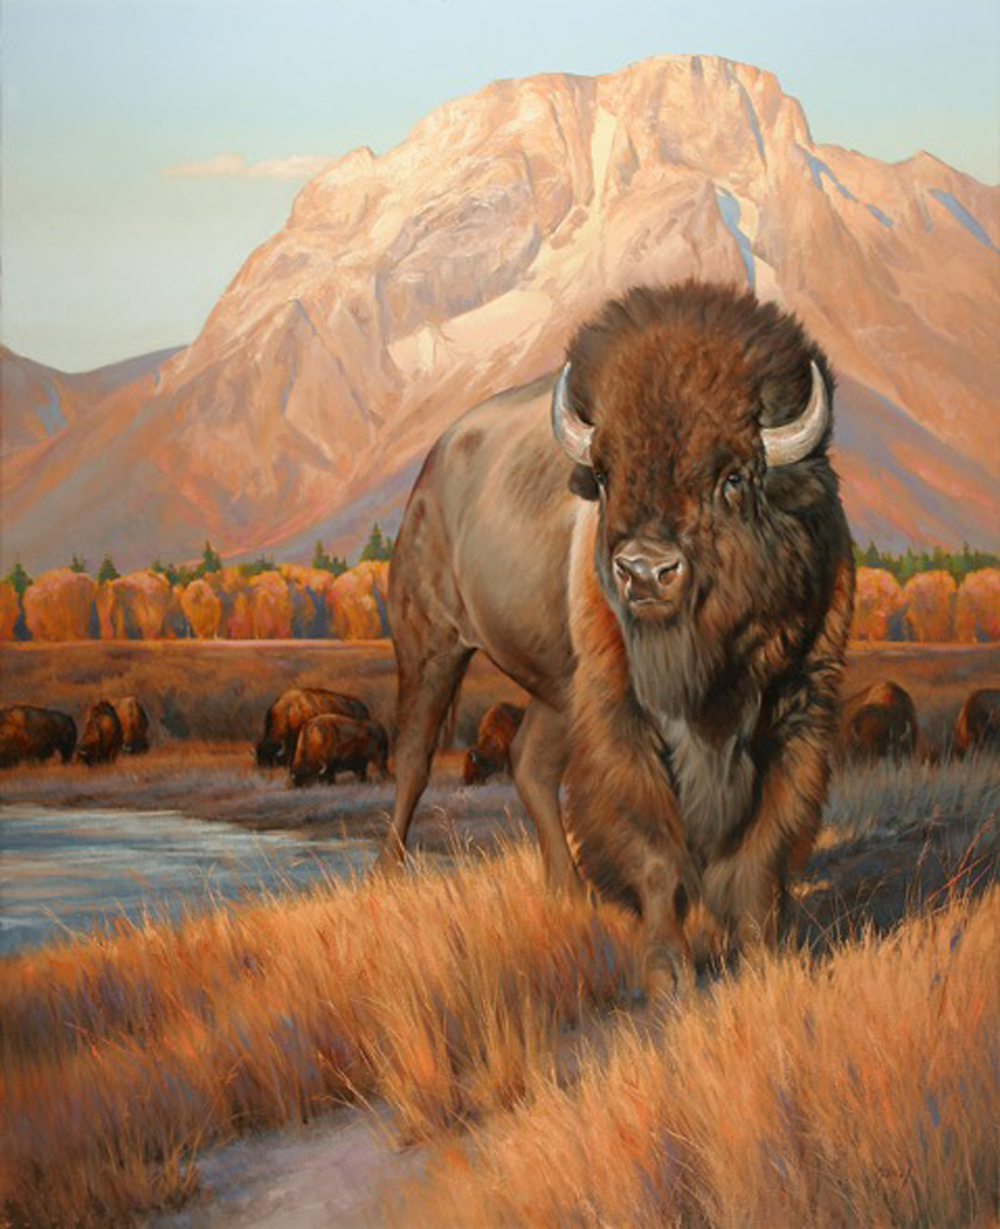 “Greeting the Dawn” by Edward Aldrich is the featured artwork of the 2016 Jackson Hole Fall Arts Festival, which begins September 7.